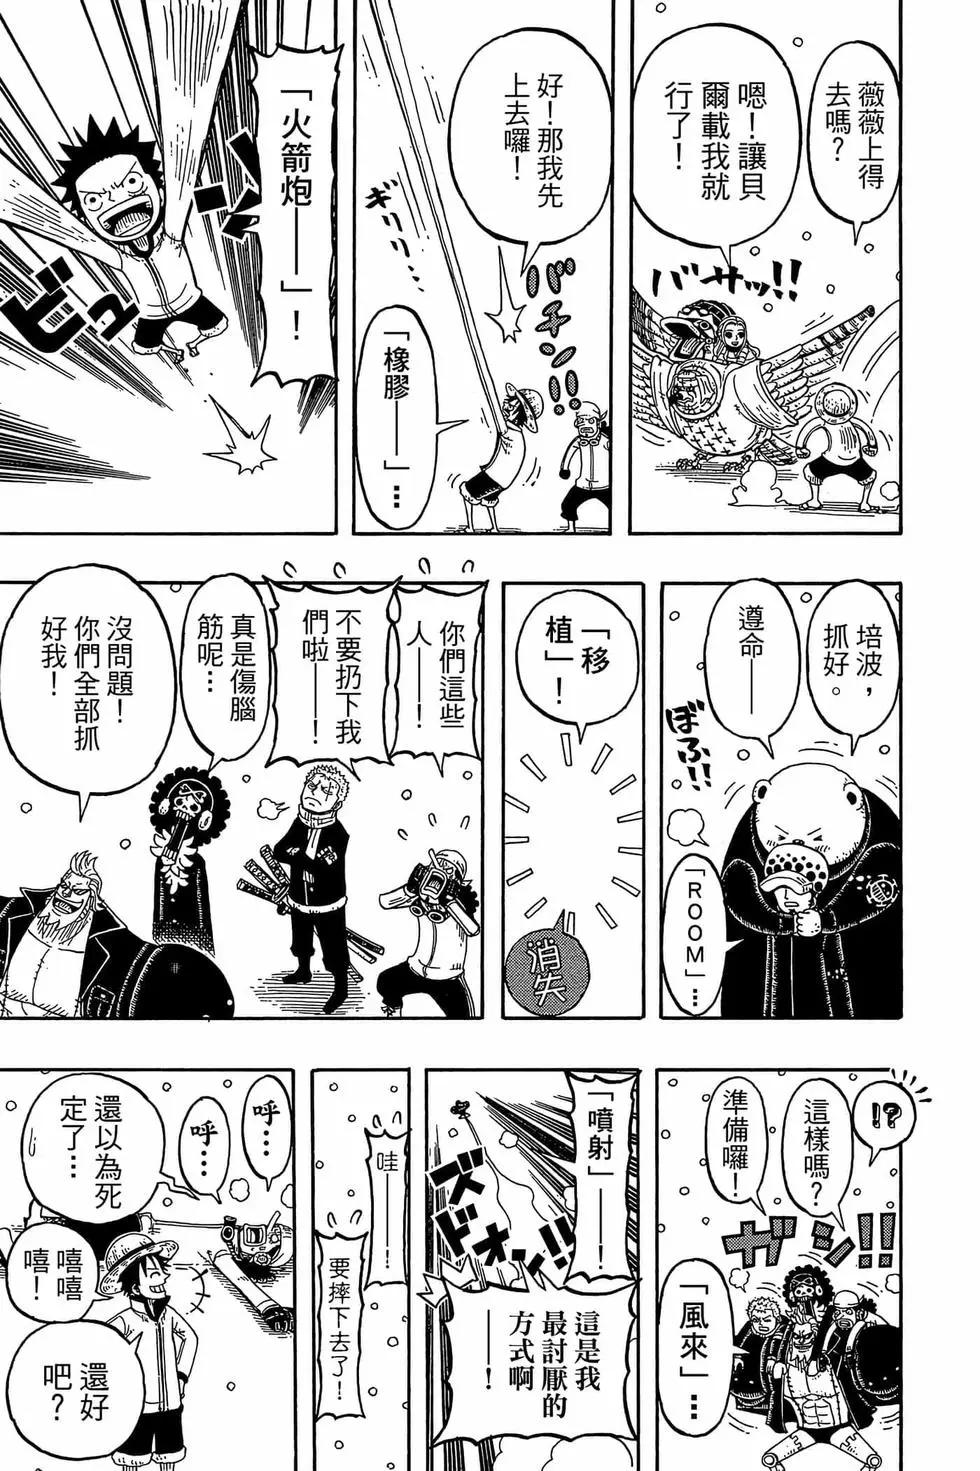 One piece party - 第03卷(1/4) - 2